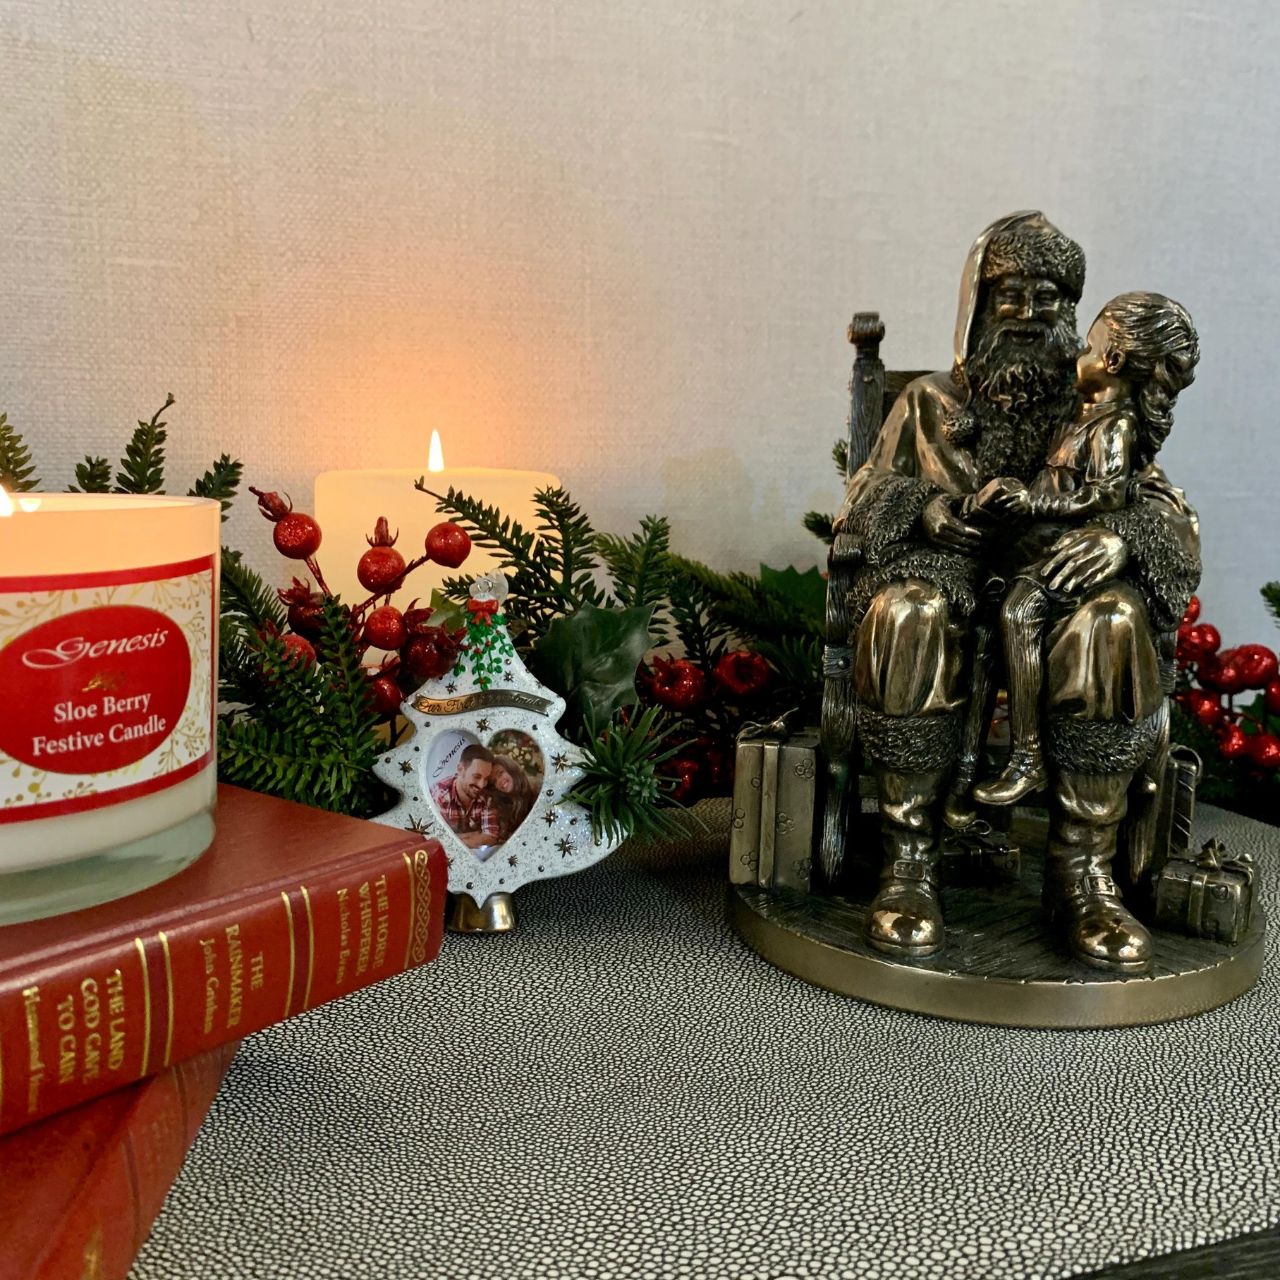 Visit to Santa by Genesis  Bring the magic of Christmas to your home this festive season. - Genesis Bronze Christmas Ornament depicting a little girl's visit to Santa. - This beautifully crafted sculpture would make a wonderful gift.